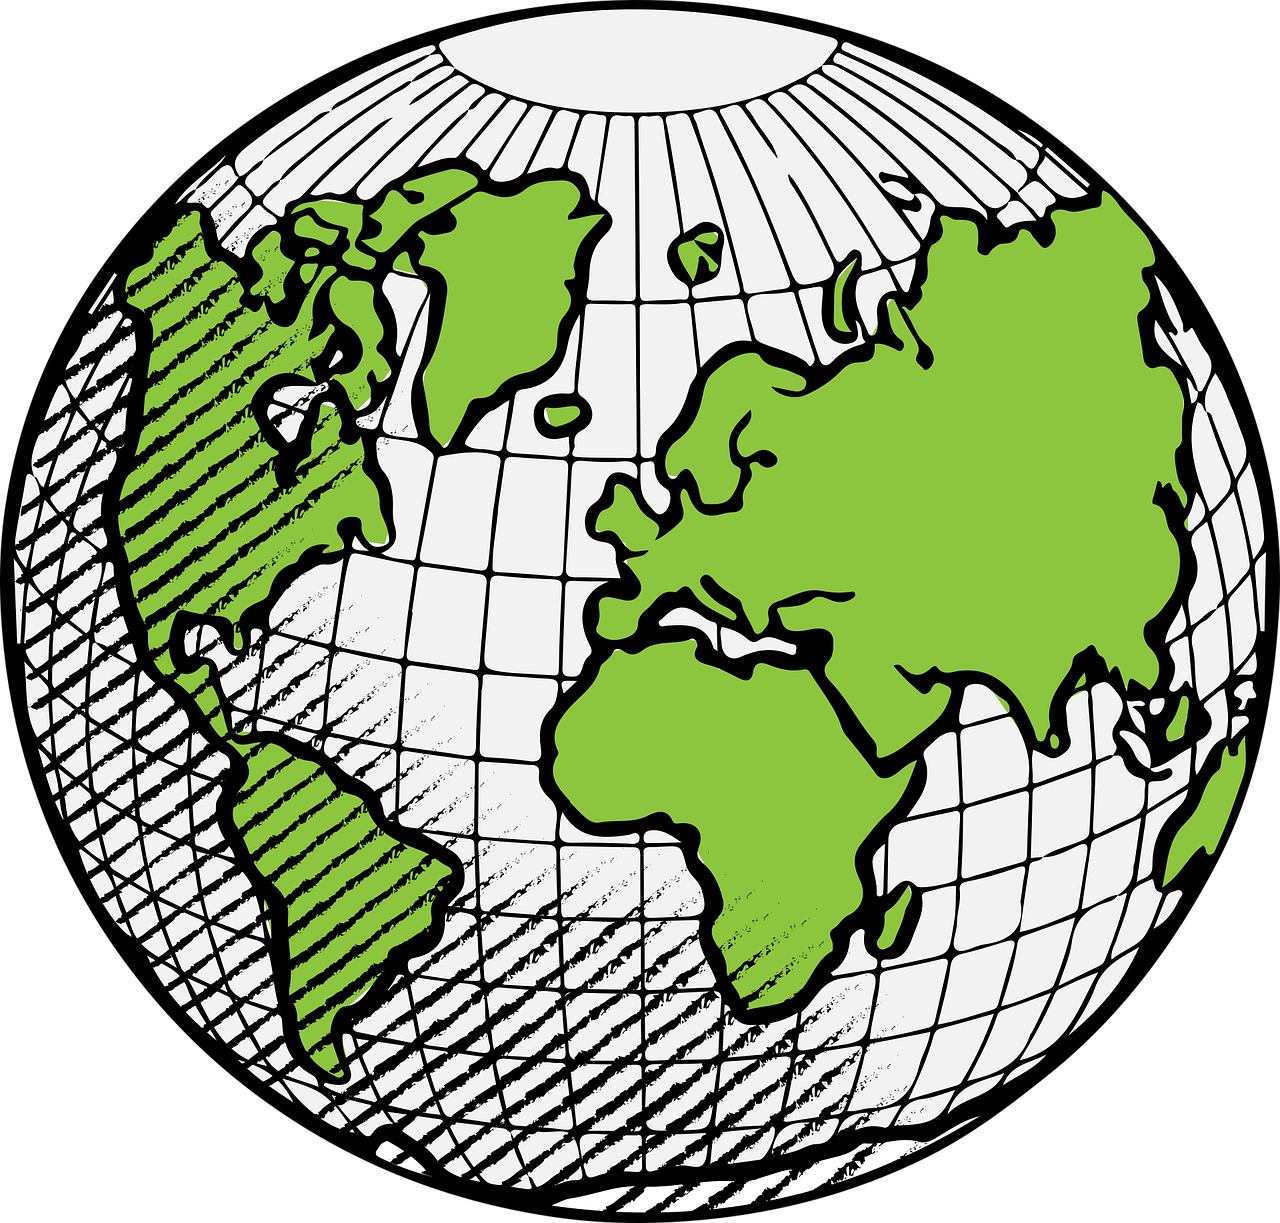 a drawing of a globe on a black background, an illustration of, black and green scheme, herge, full color illustration, rorsach path traced